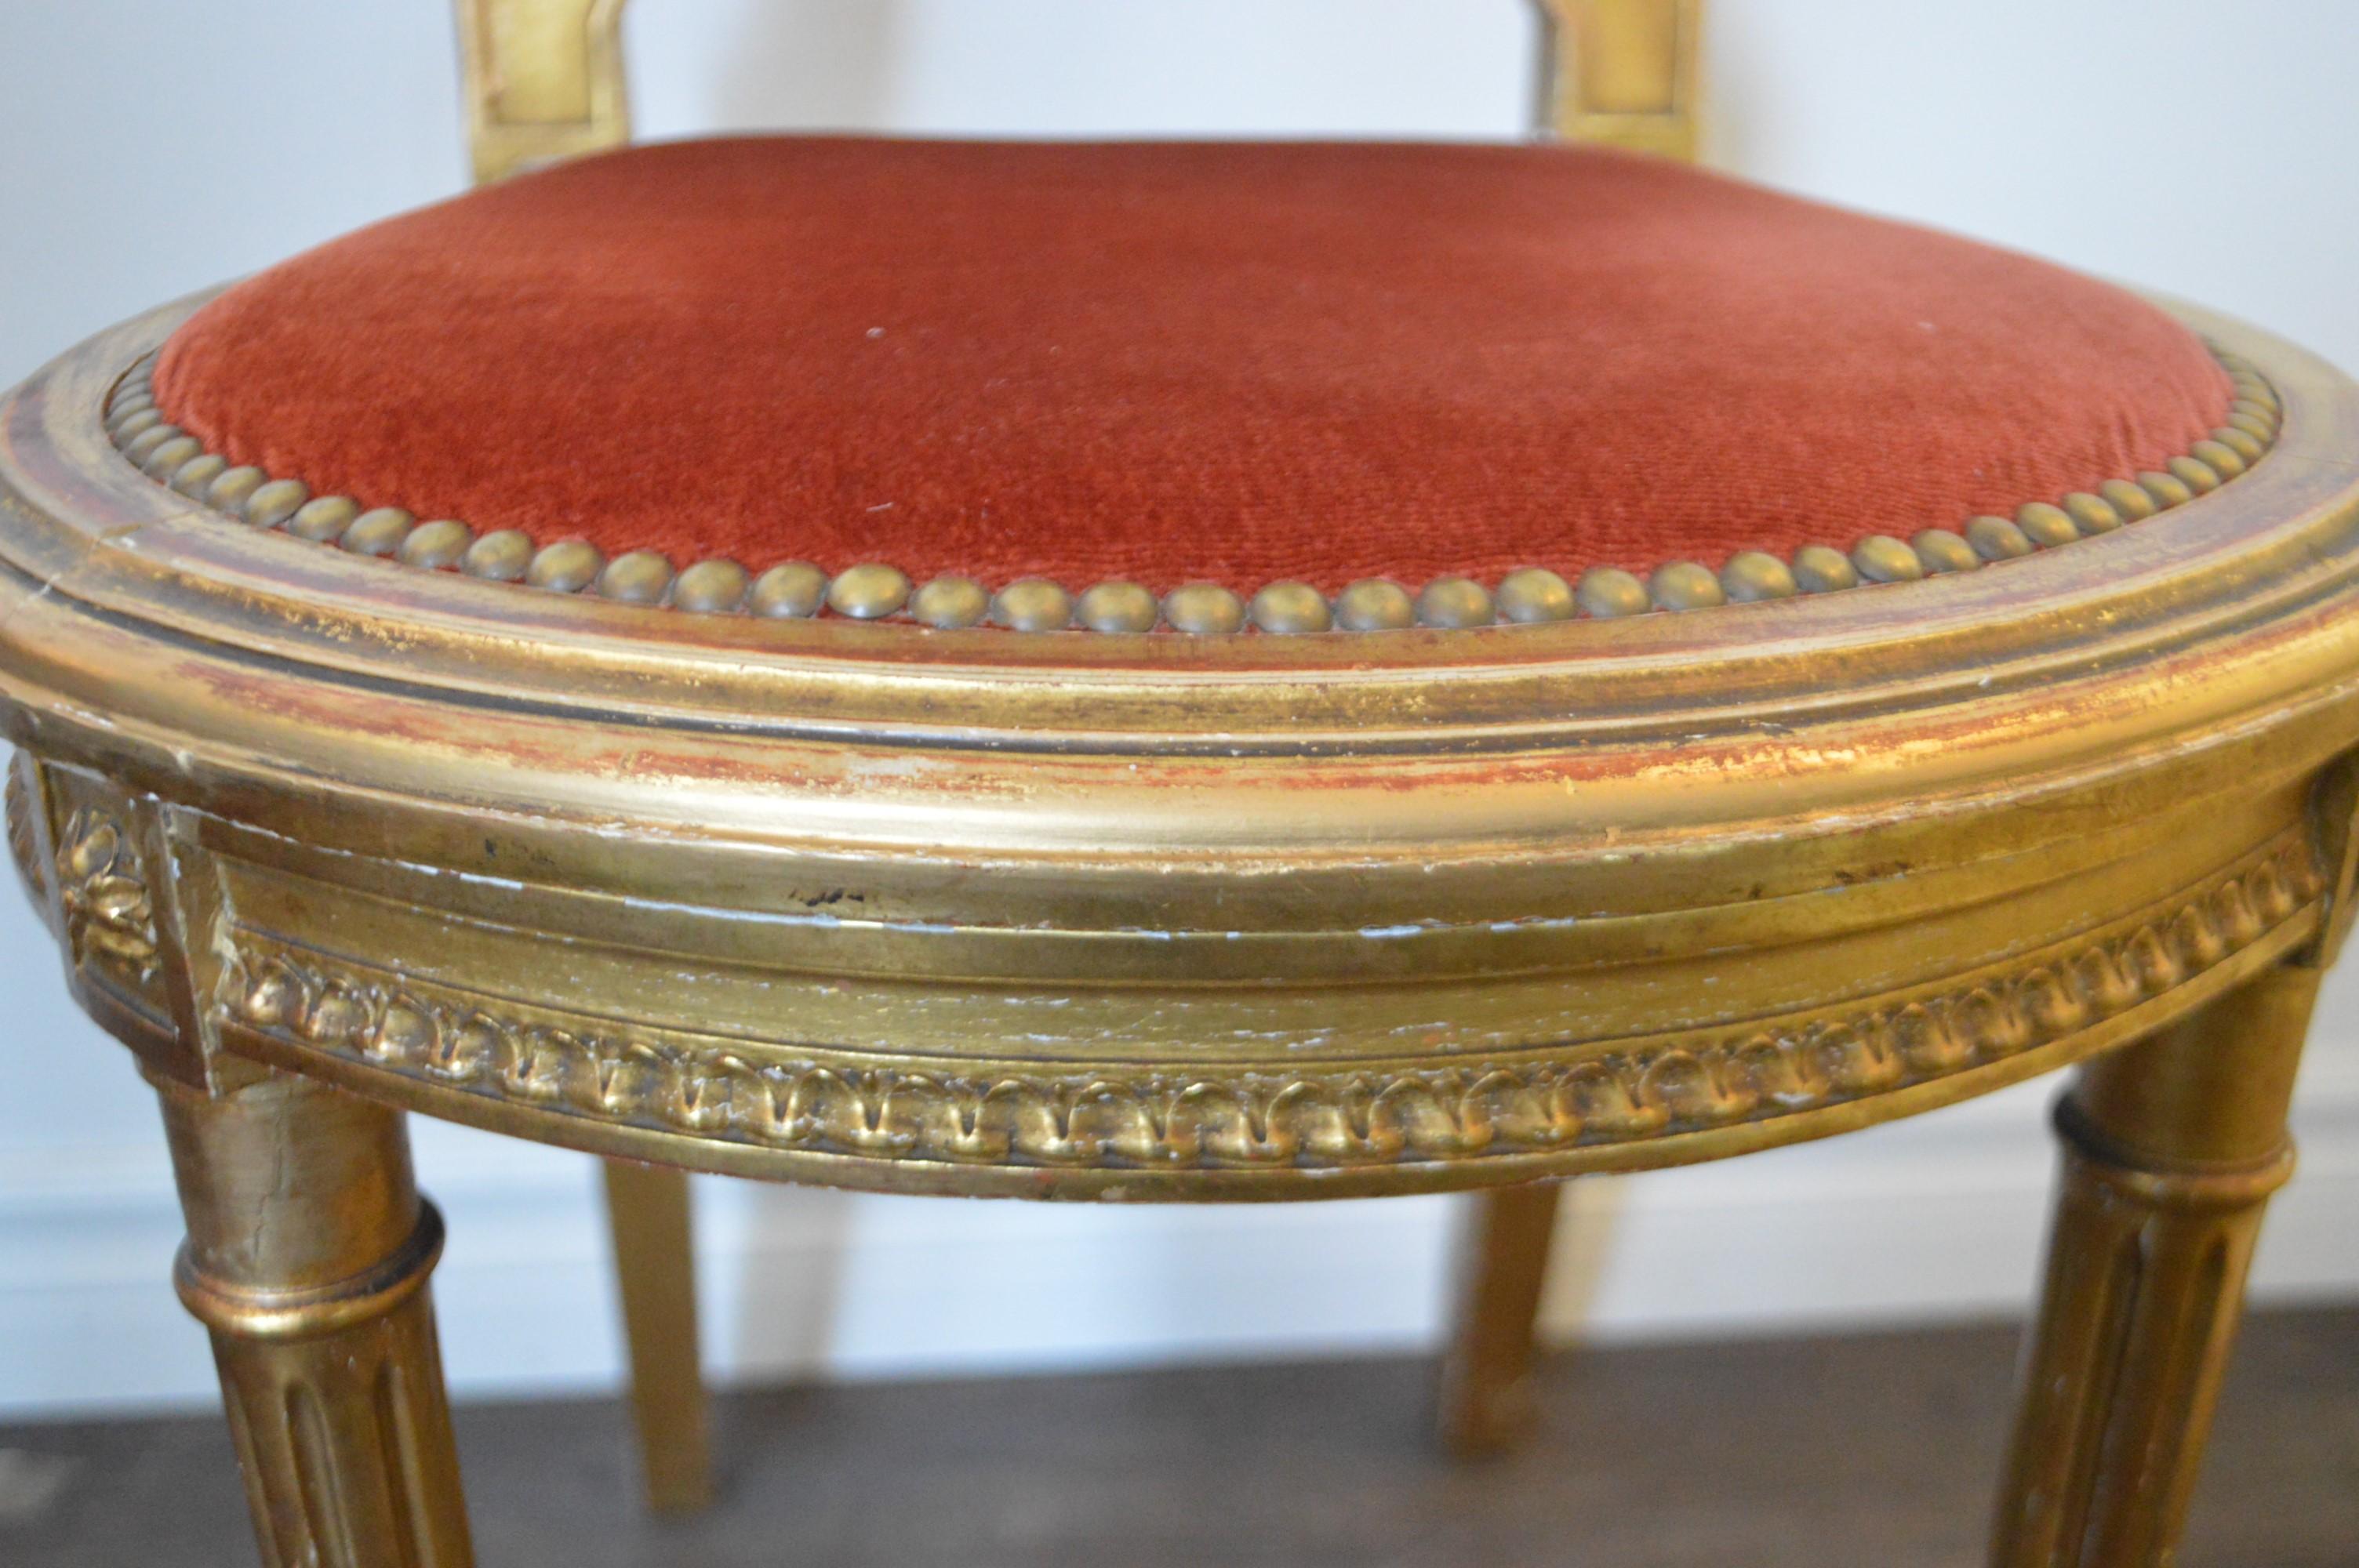 Louis XVI Style Gilded Accent Chair, Caned Back, Original Apricot Velvet Seat In Good Condition For Sale In Oakville, ON